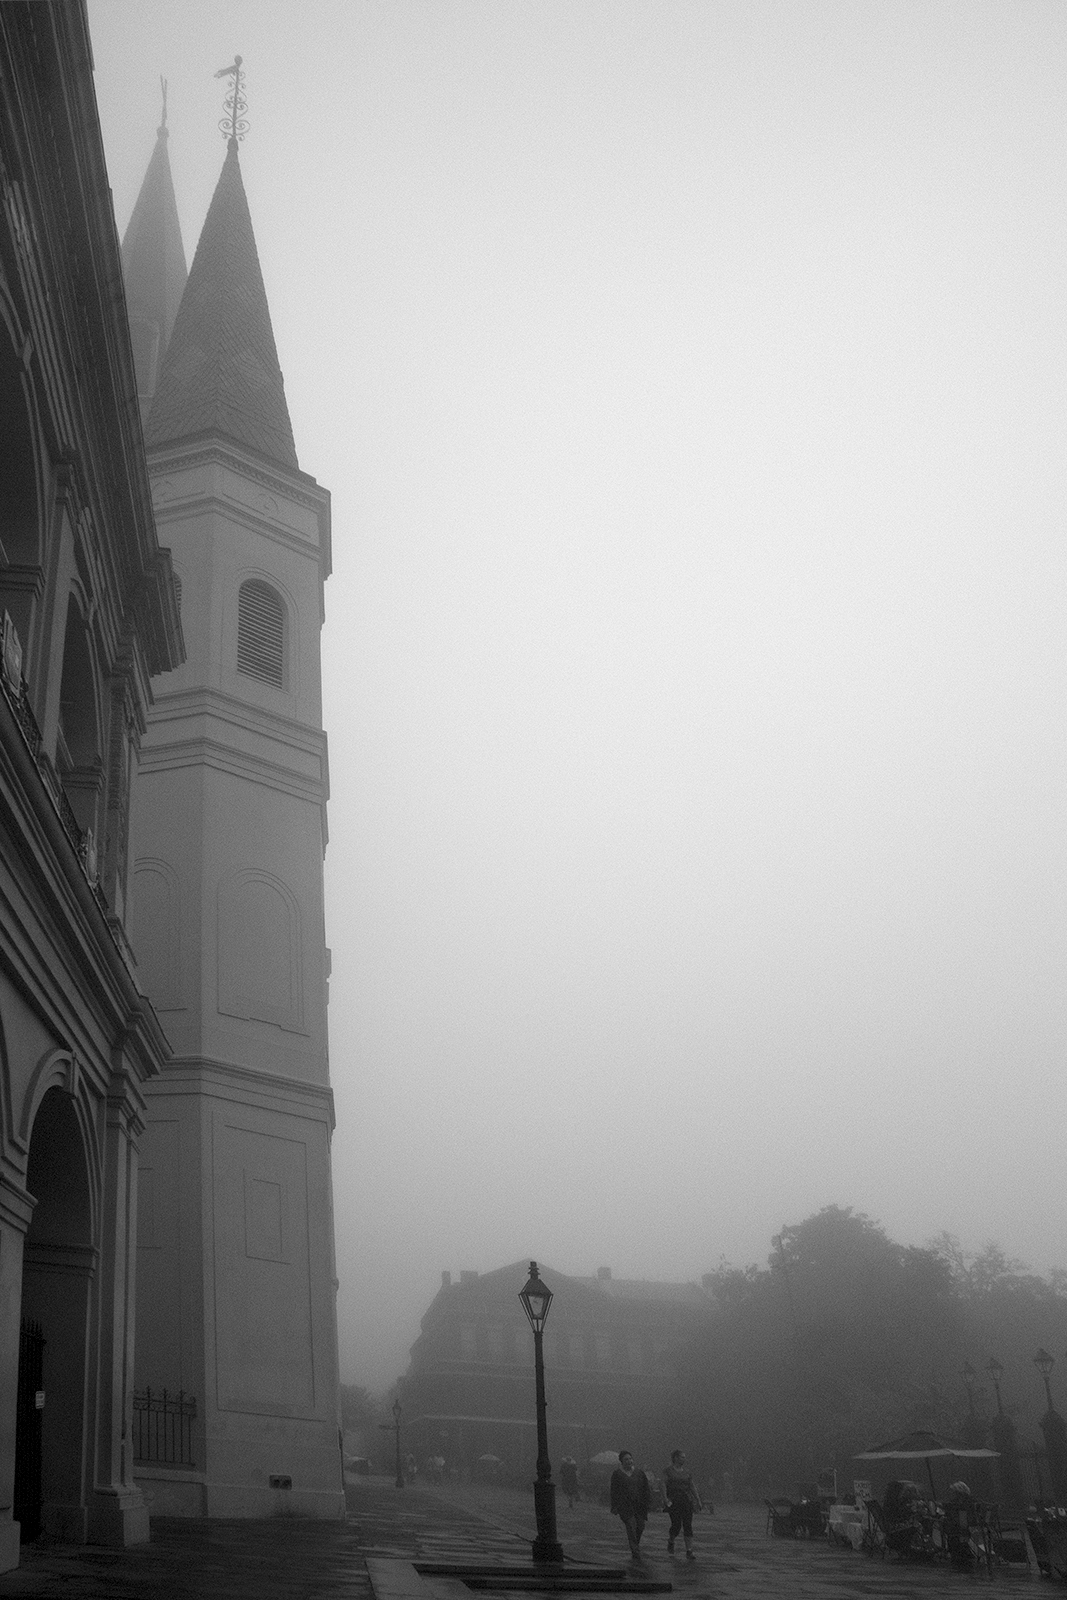 St. Louis Cathedral in the morning fog. Photograph by Ann Fisher